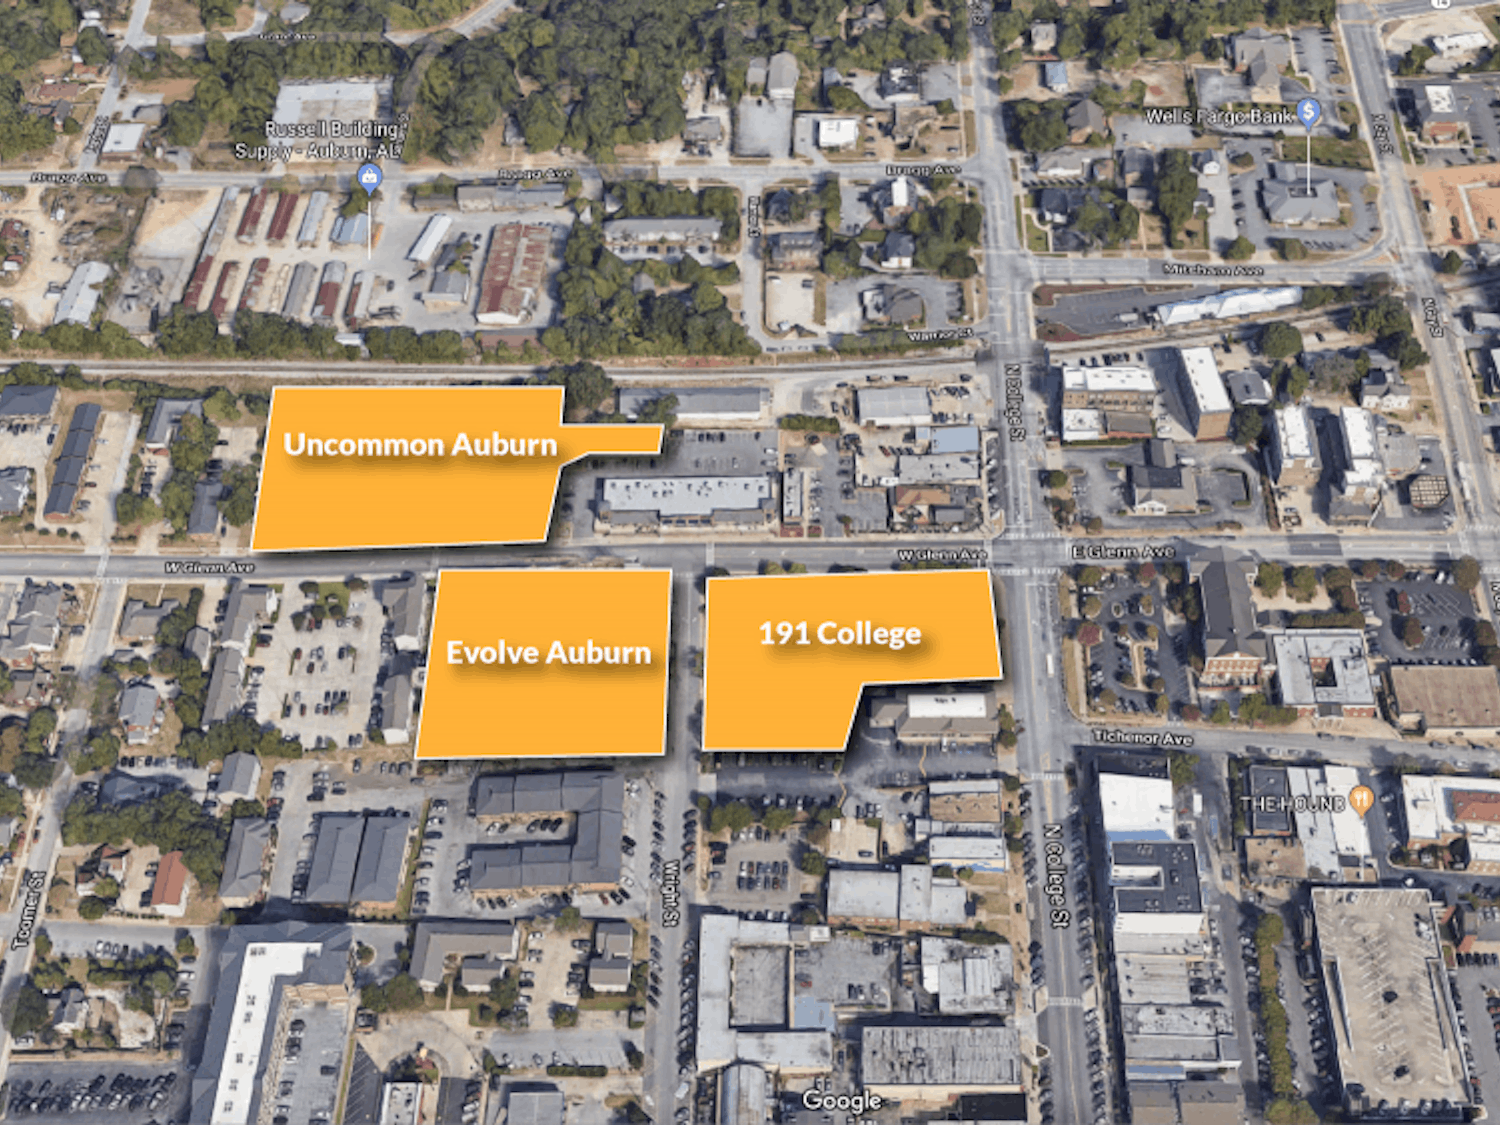 The planned Uncommon Auburn apartment complex would be located just north of Evolve Auburn on West Glenn Avenue. (Source: City Documents)